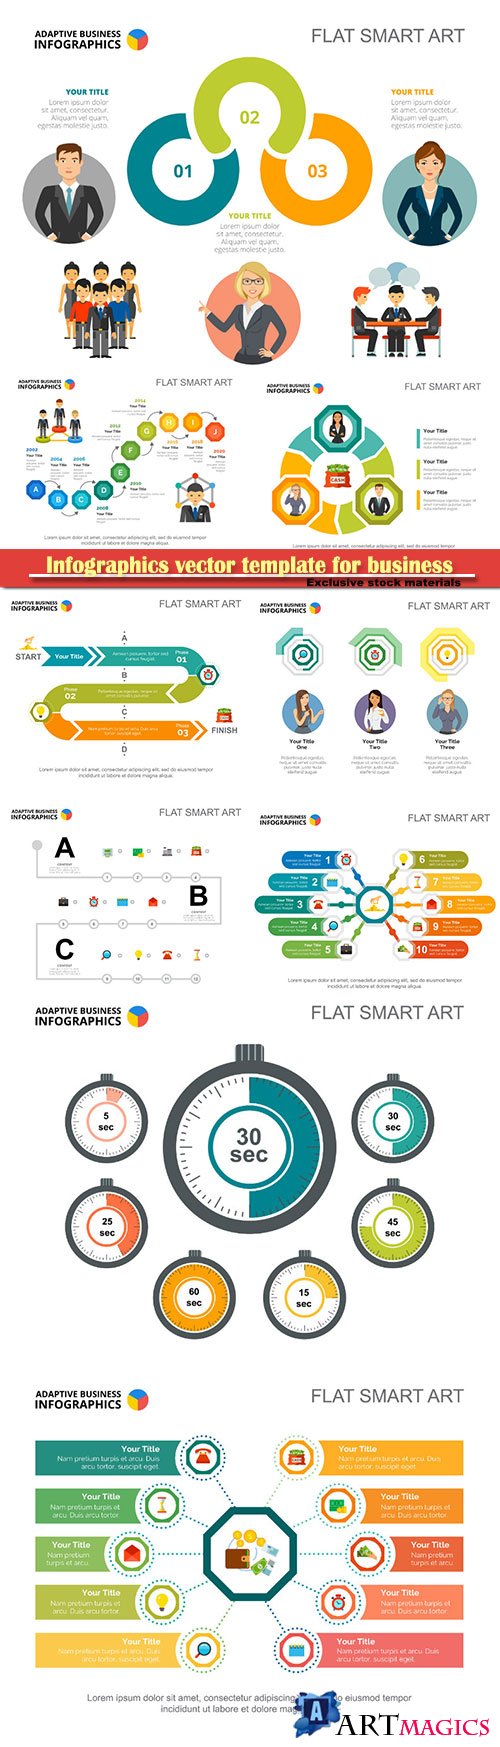 Infographics vector template for business presentations or information banner # 32